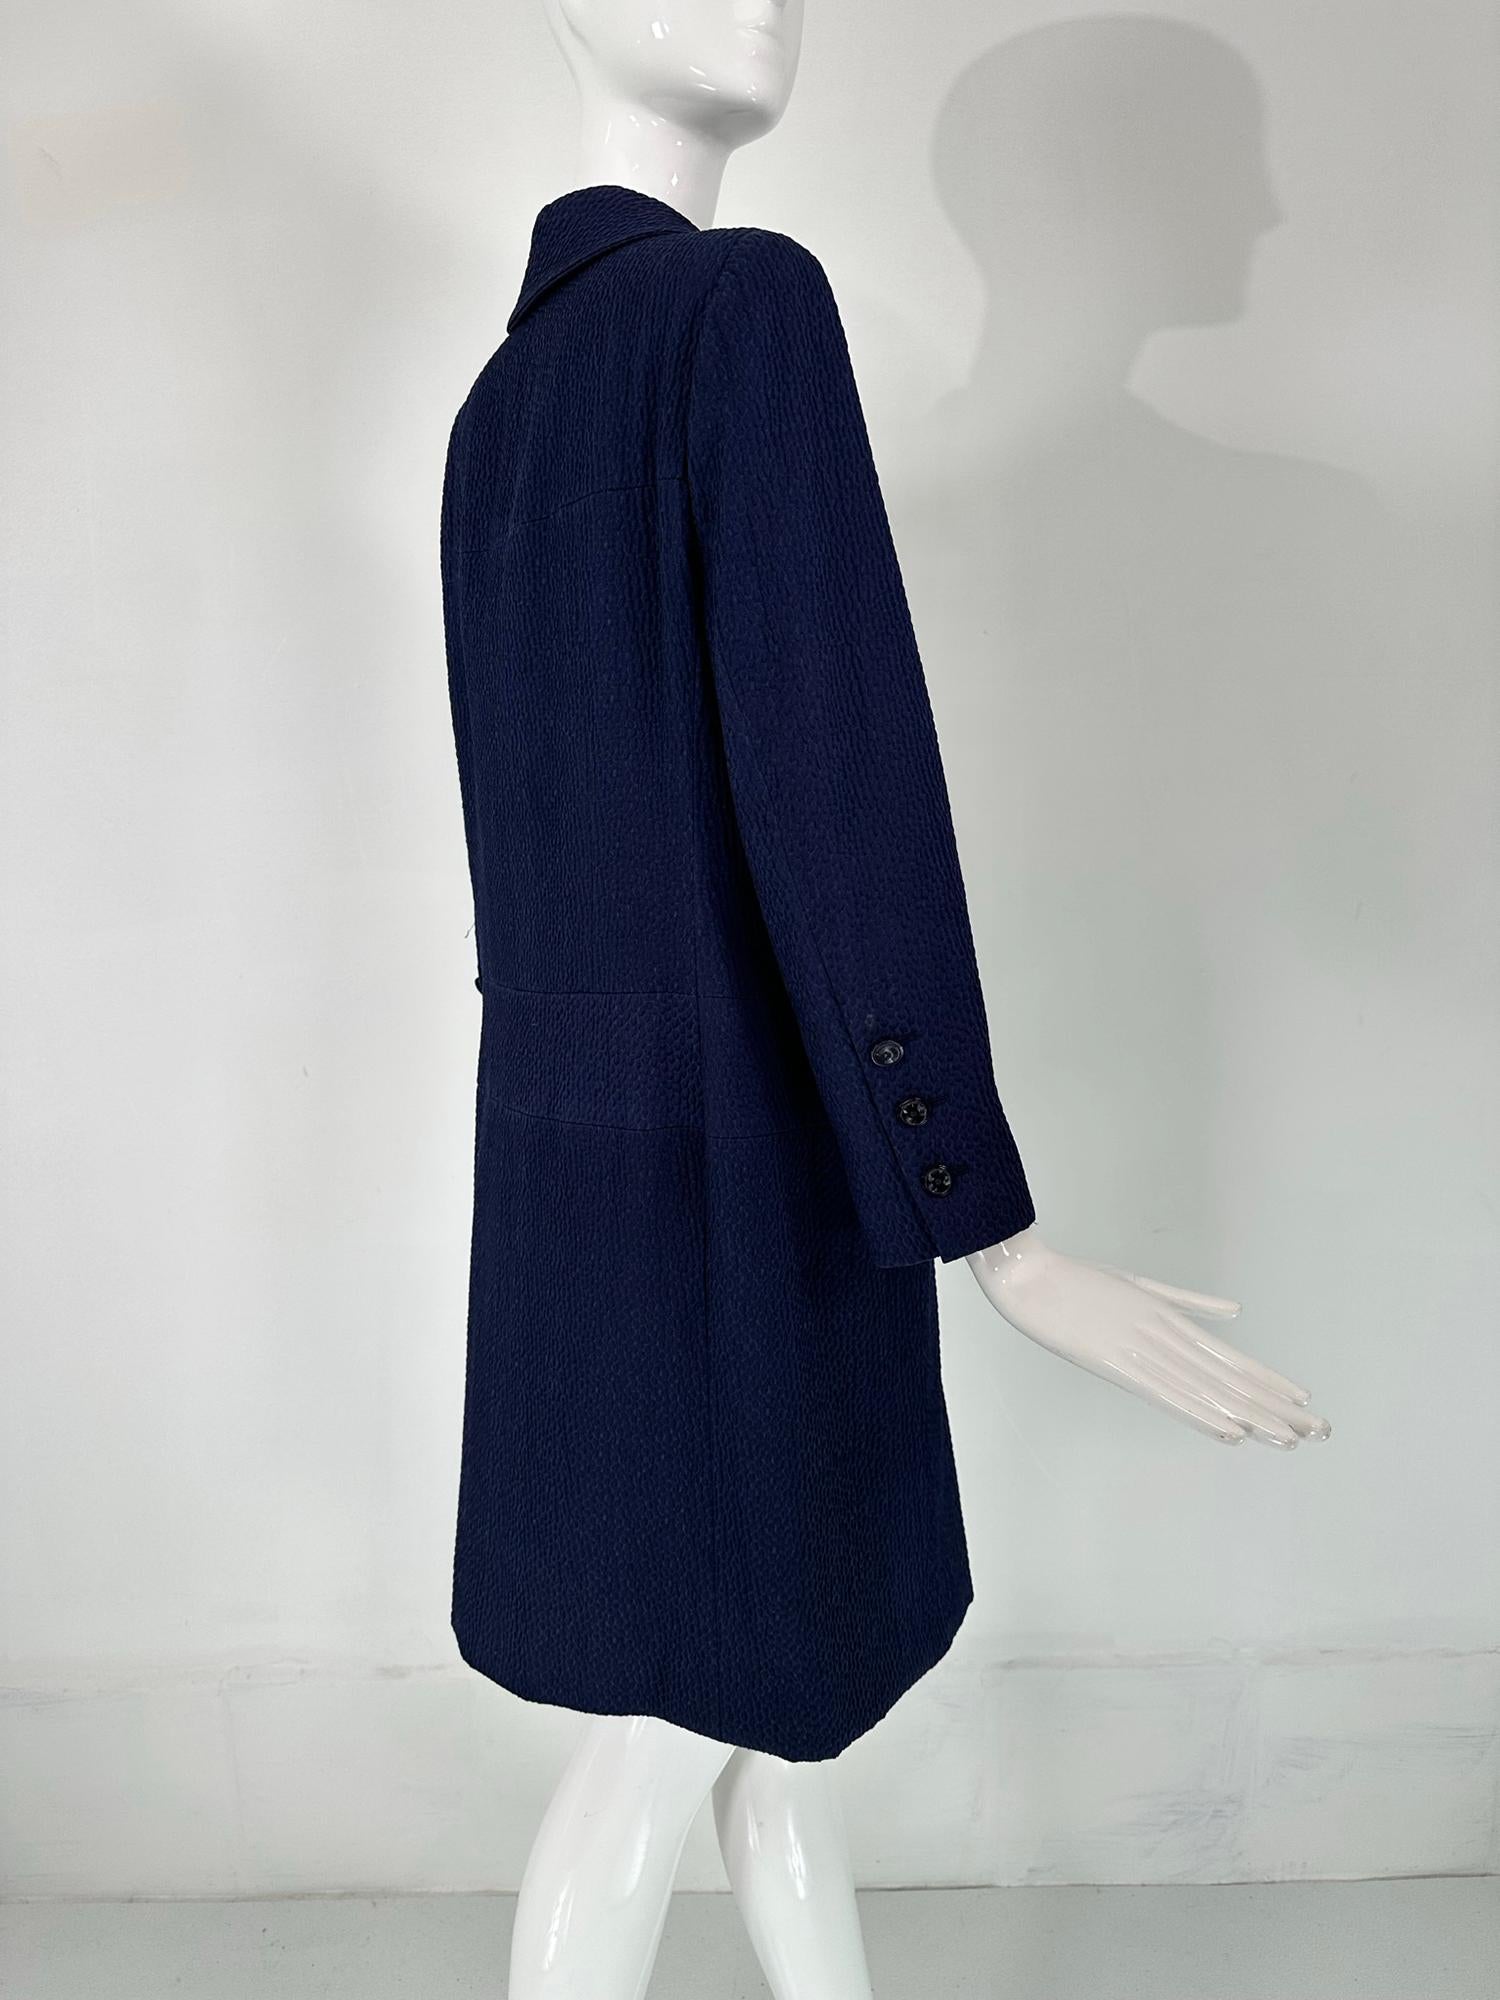 Chanel Navy Blue Single Breasted 4 Pocket Cloque Cotton Coat  For Sale 8